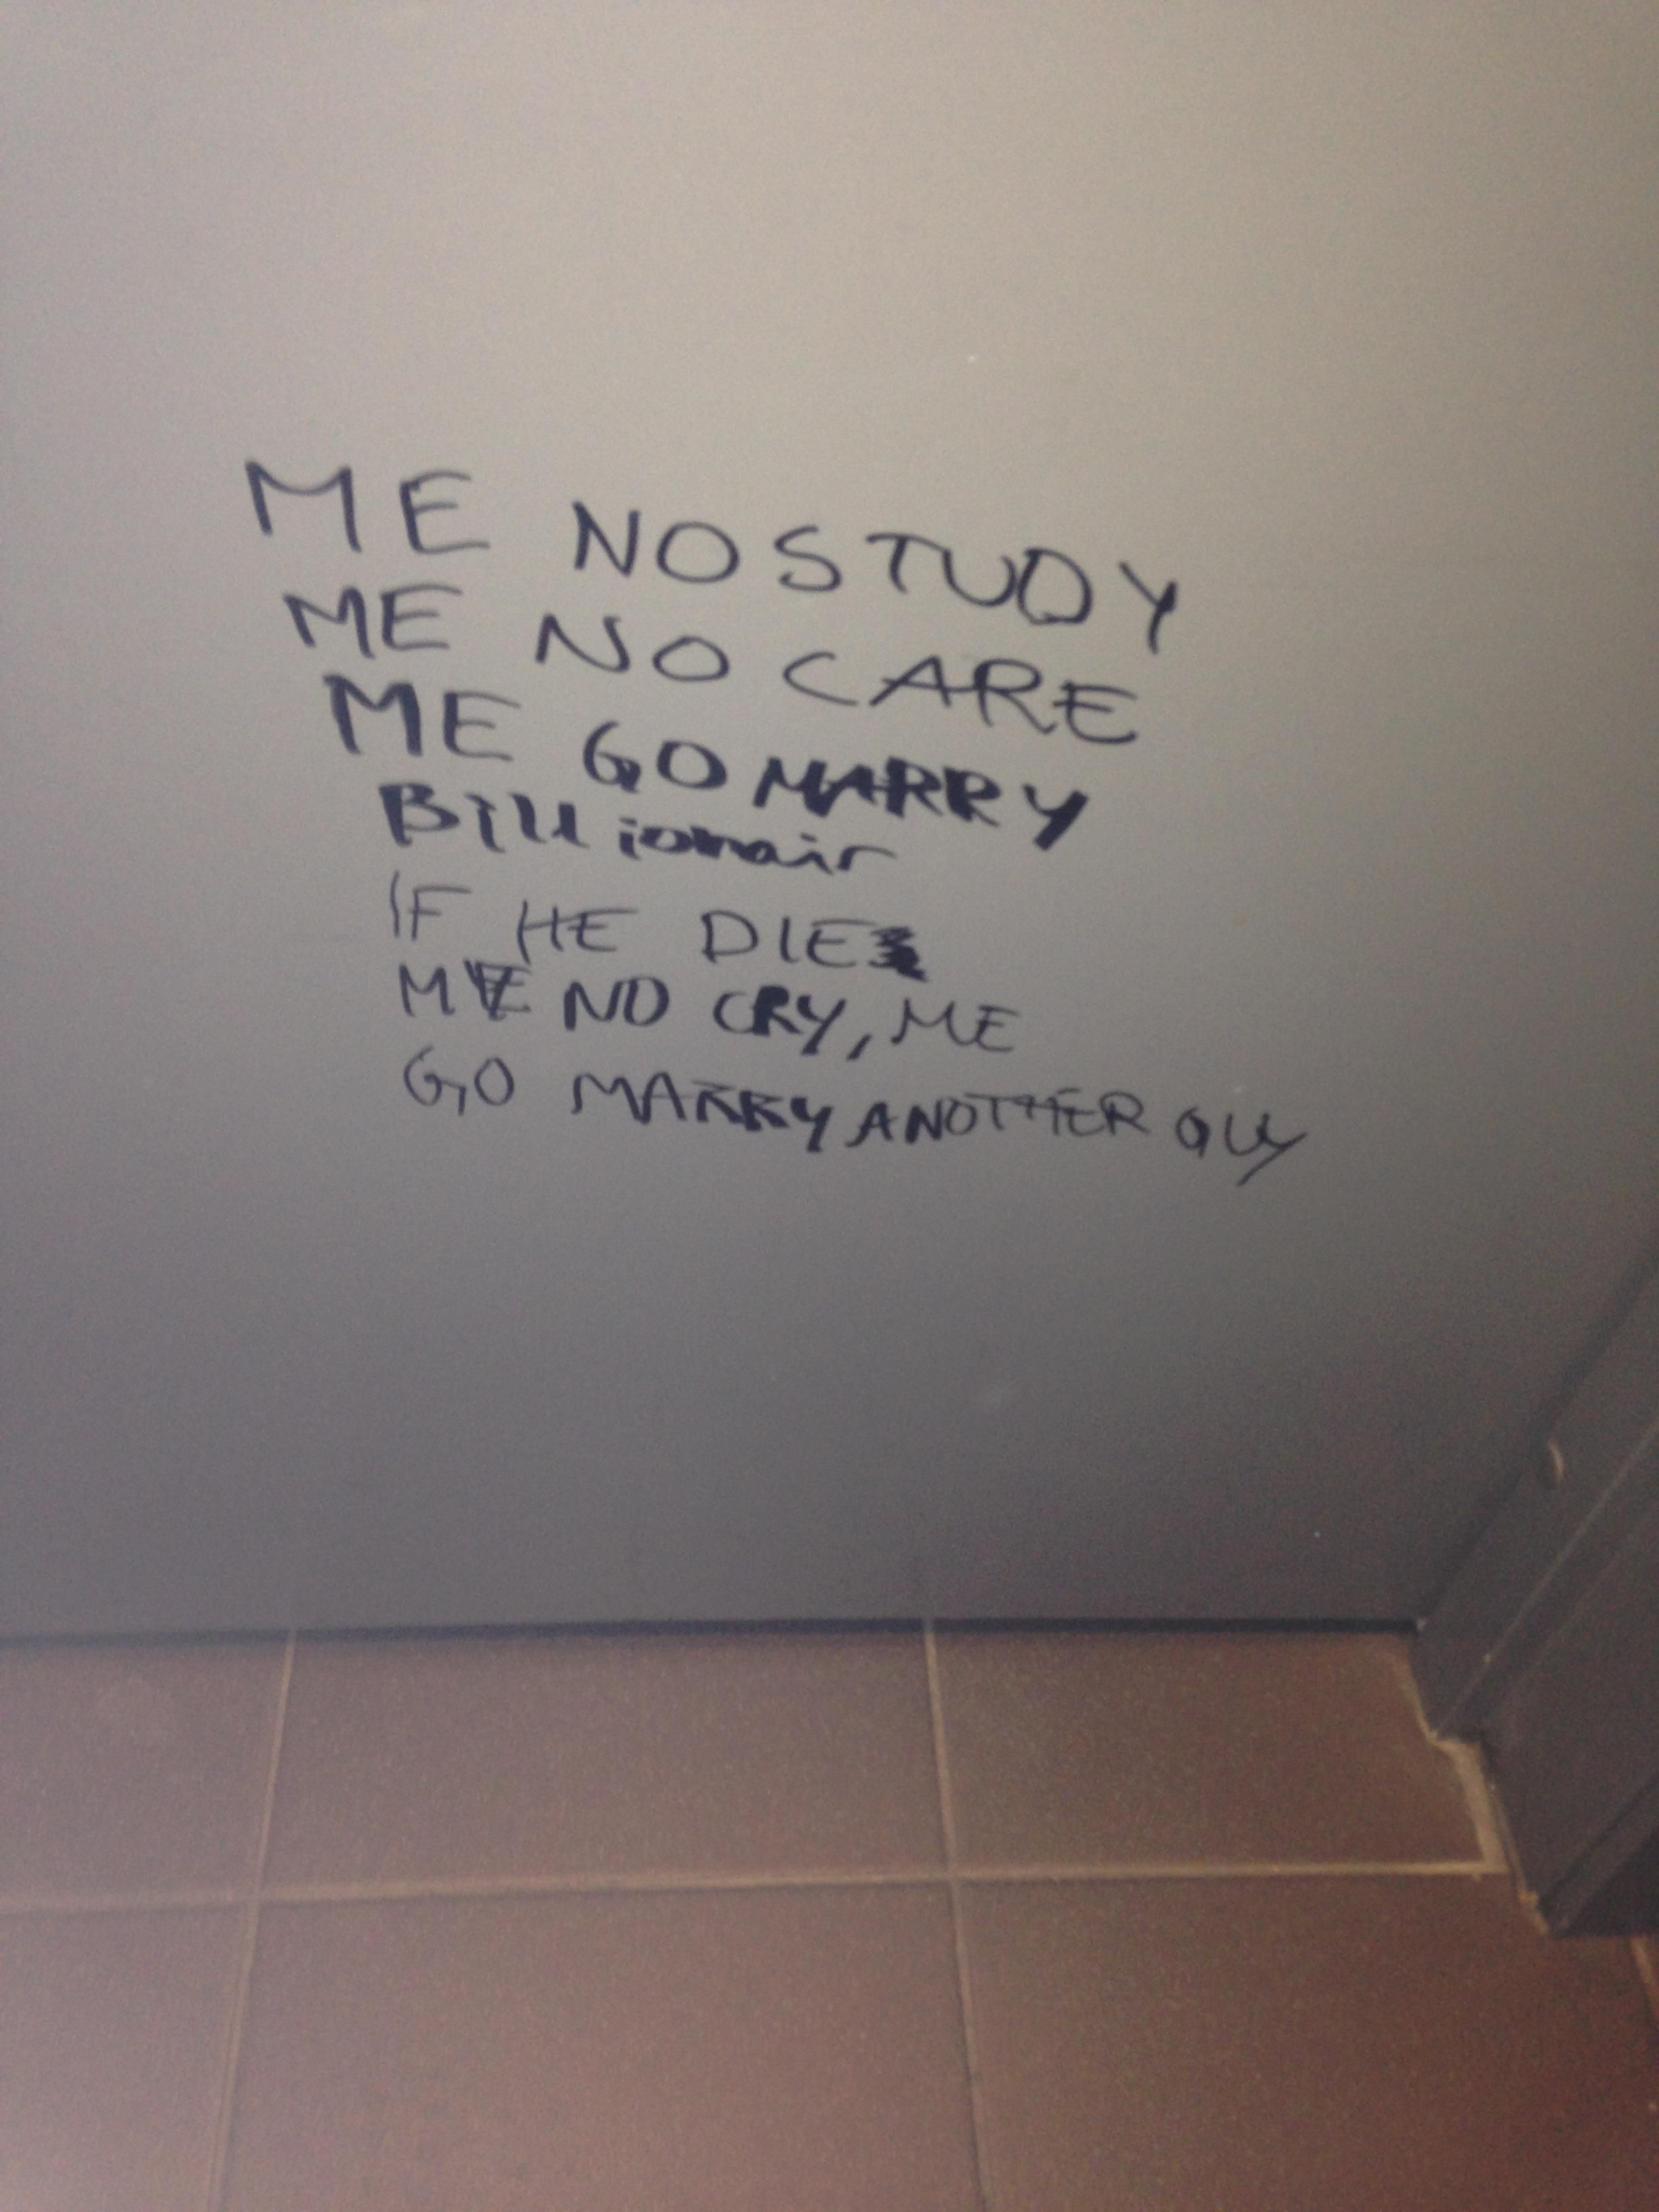 Public restroom wall changed my life